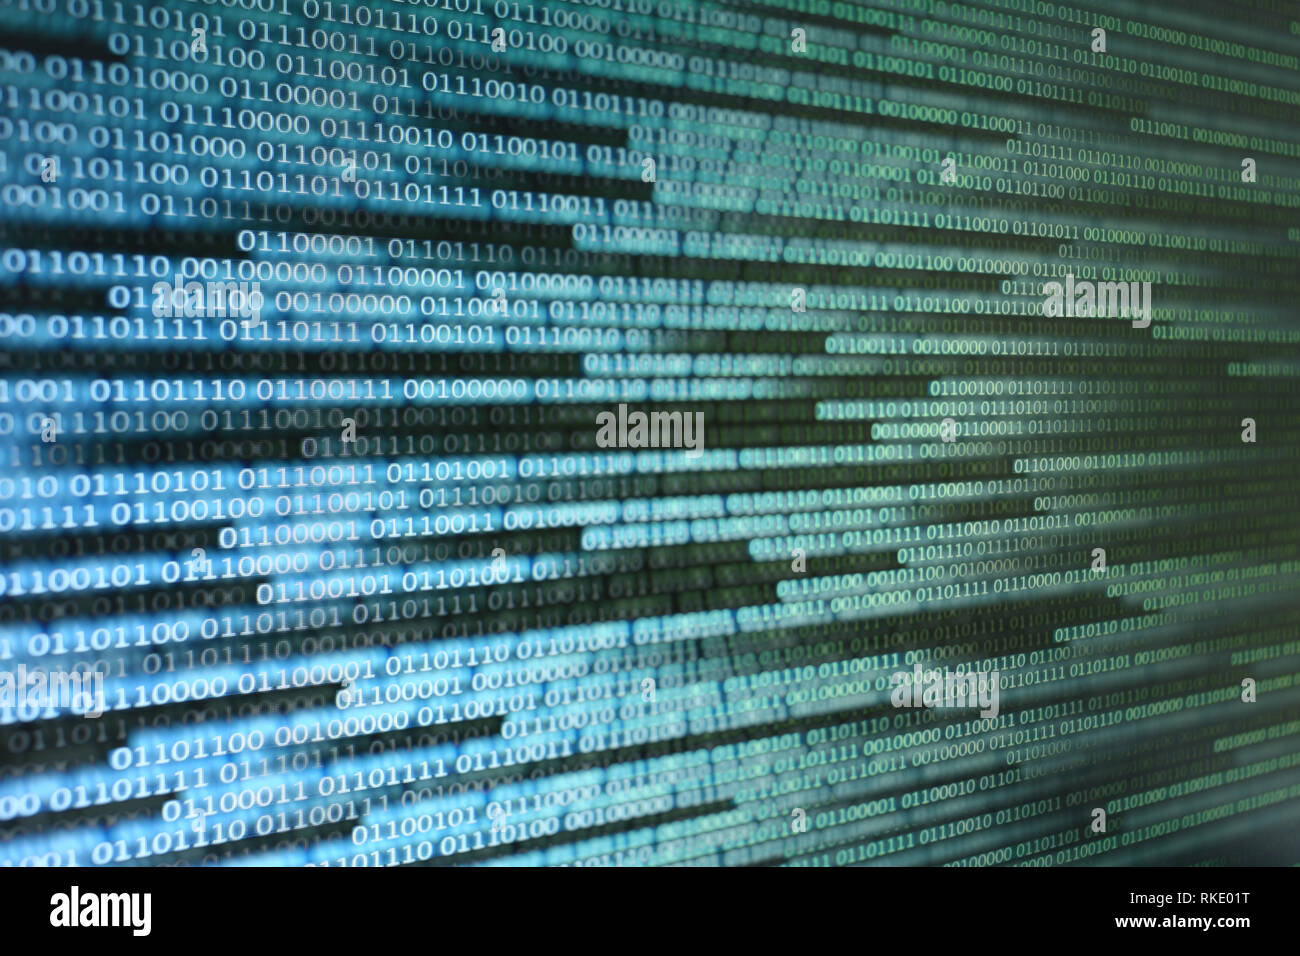 binary data on computer monitor. multiple layers of codes streaming signifying transferring information over internet medium. Stock Photo